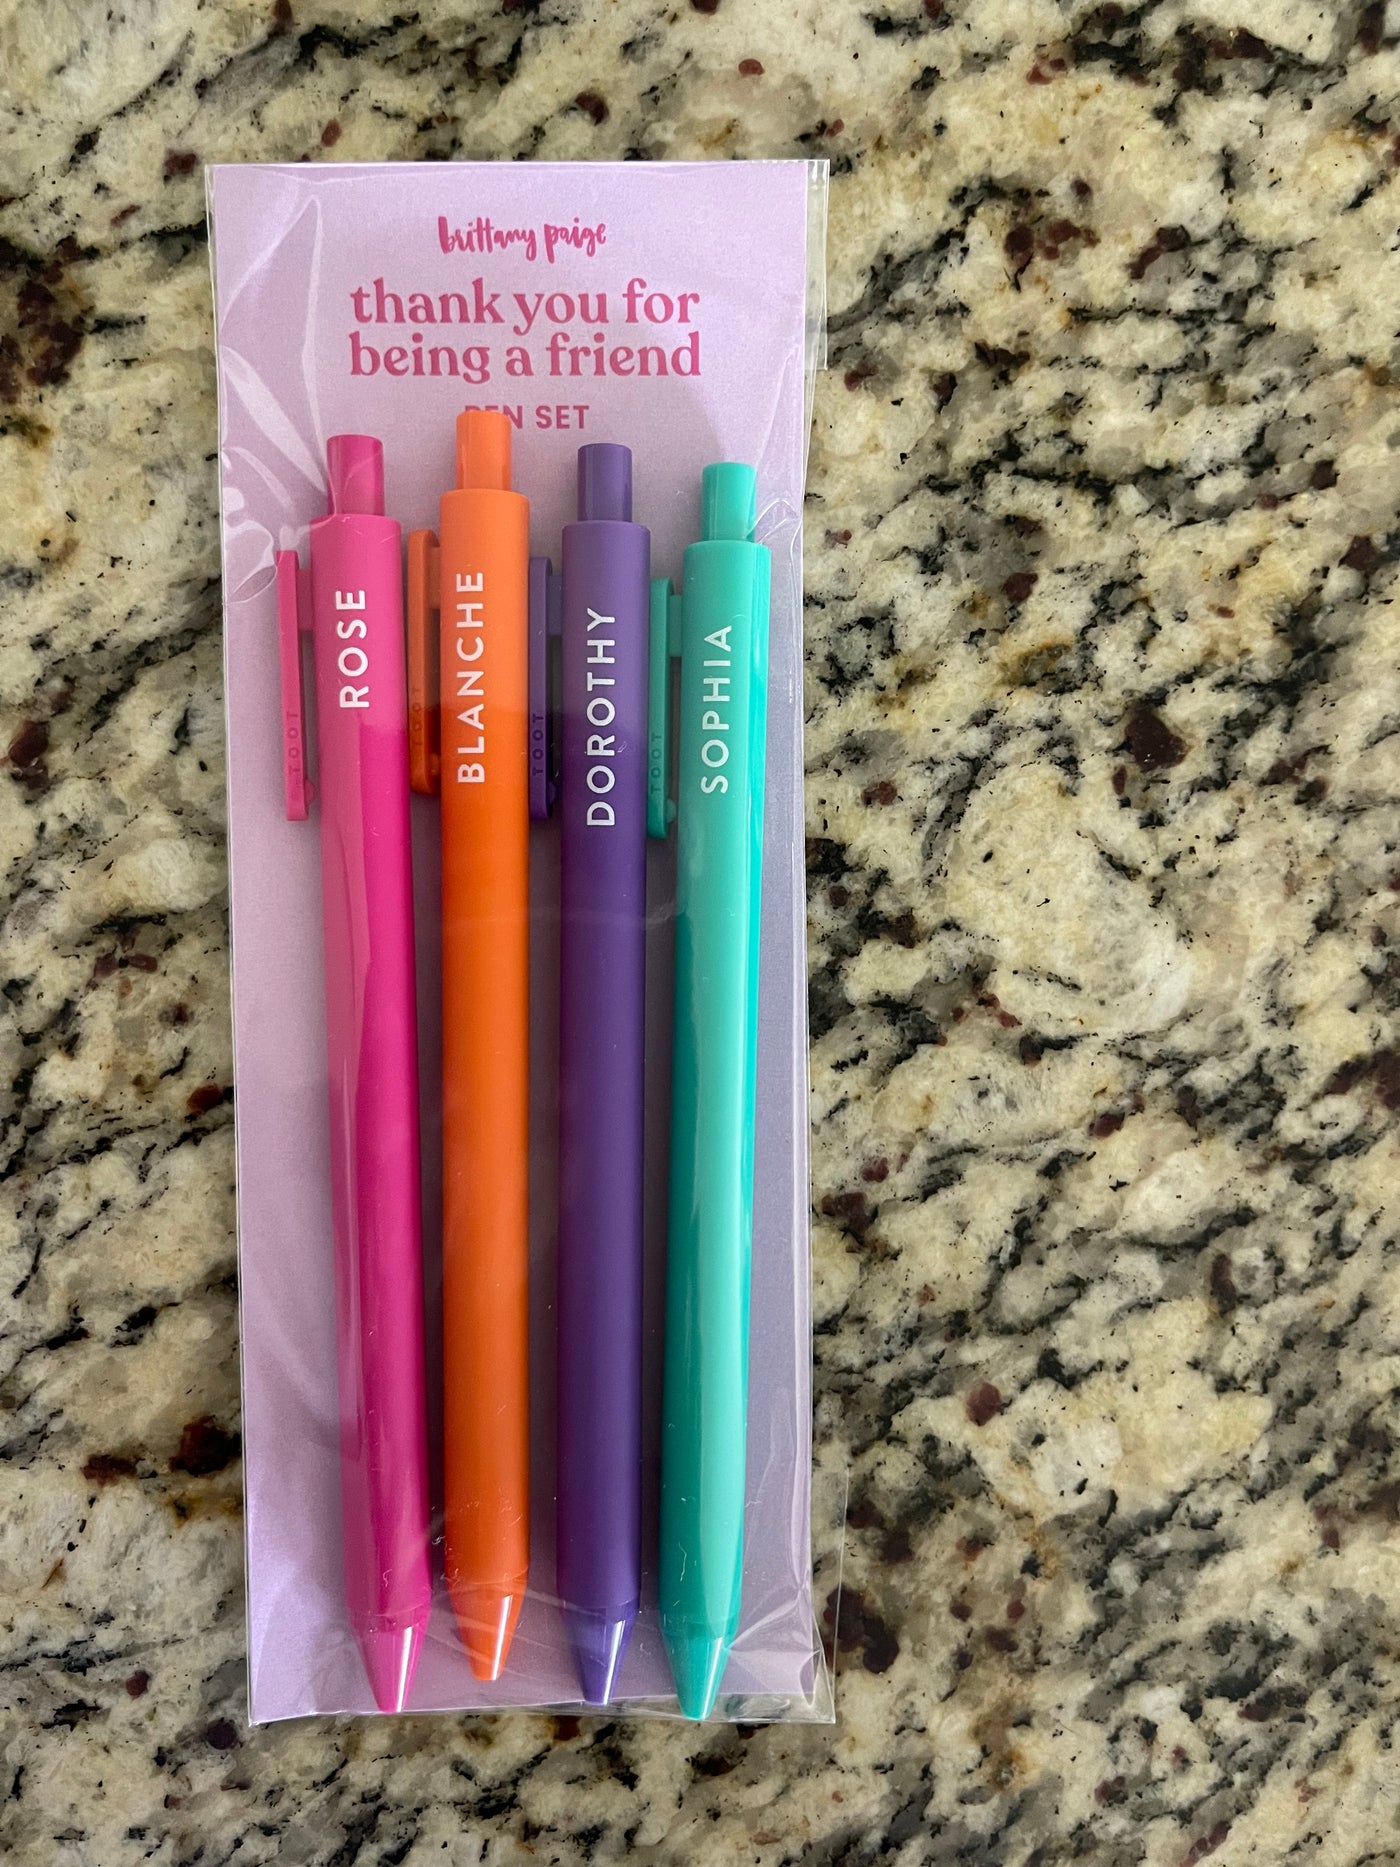 Thank You For Being a Friend Pen Set